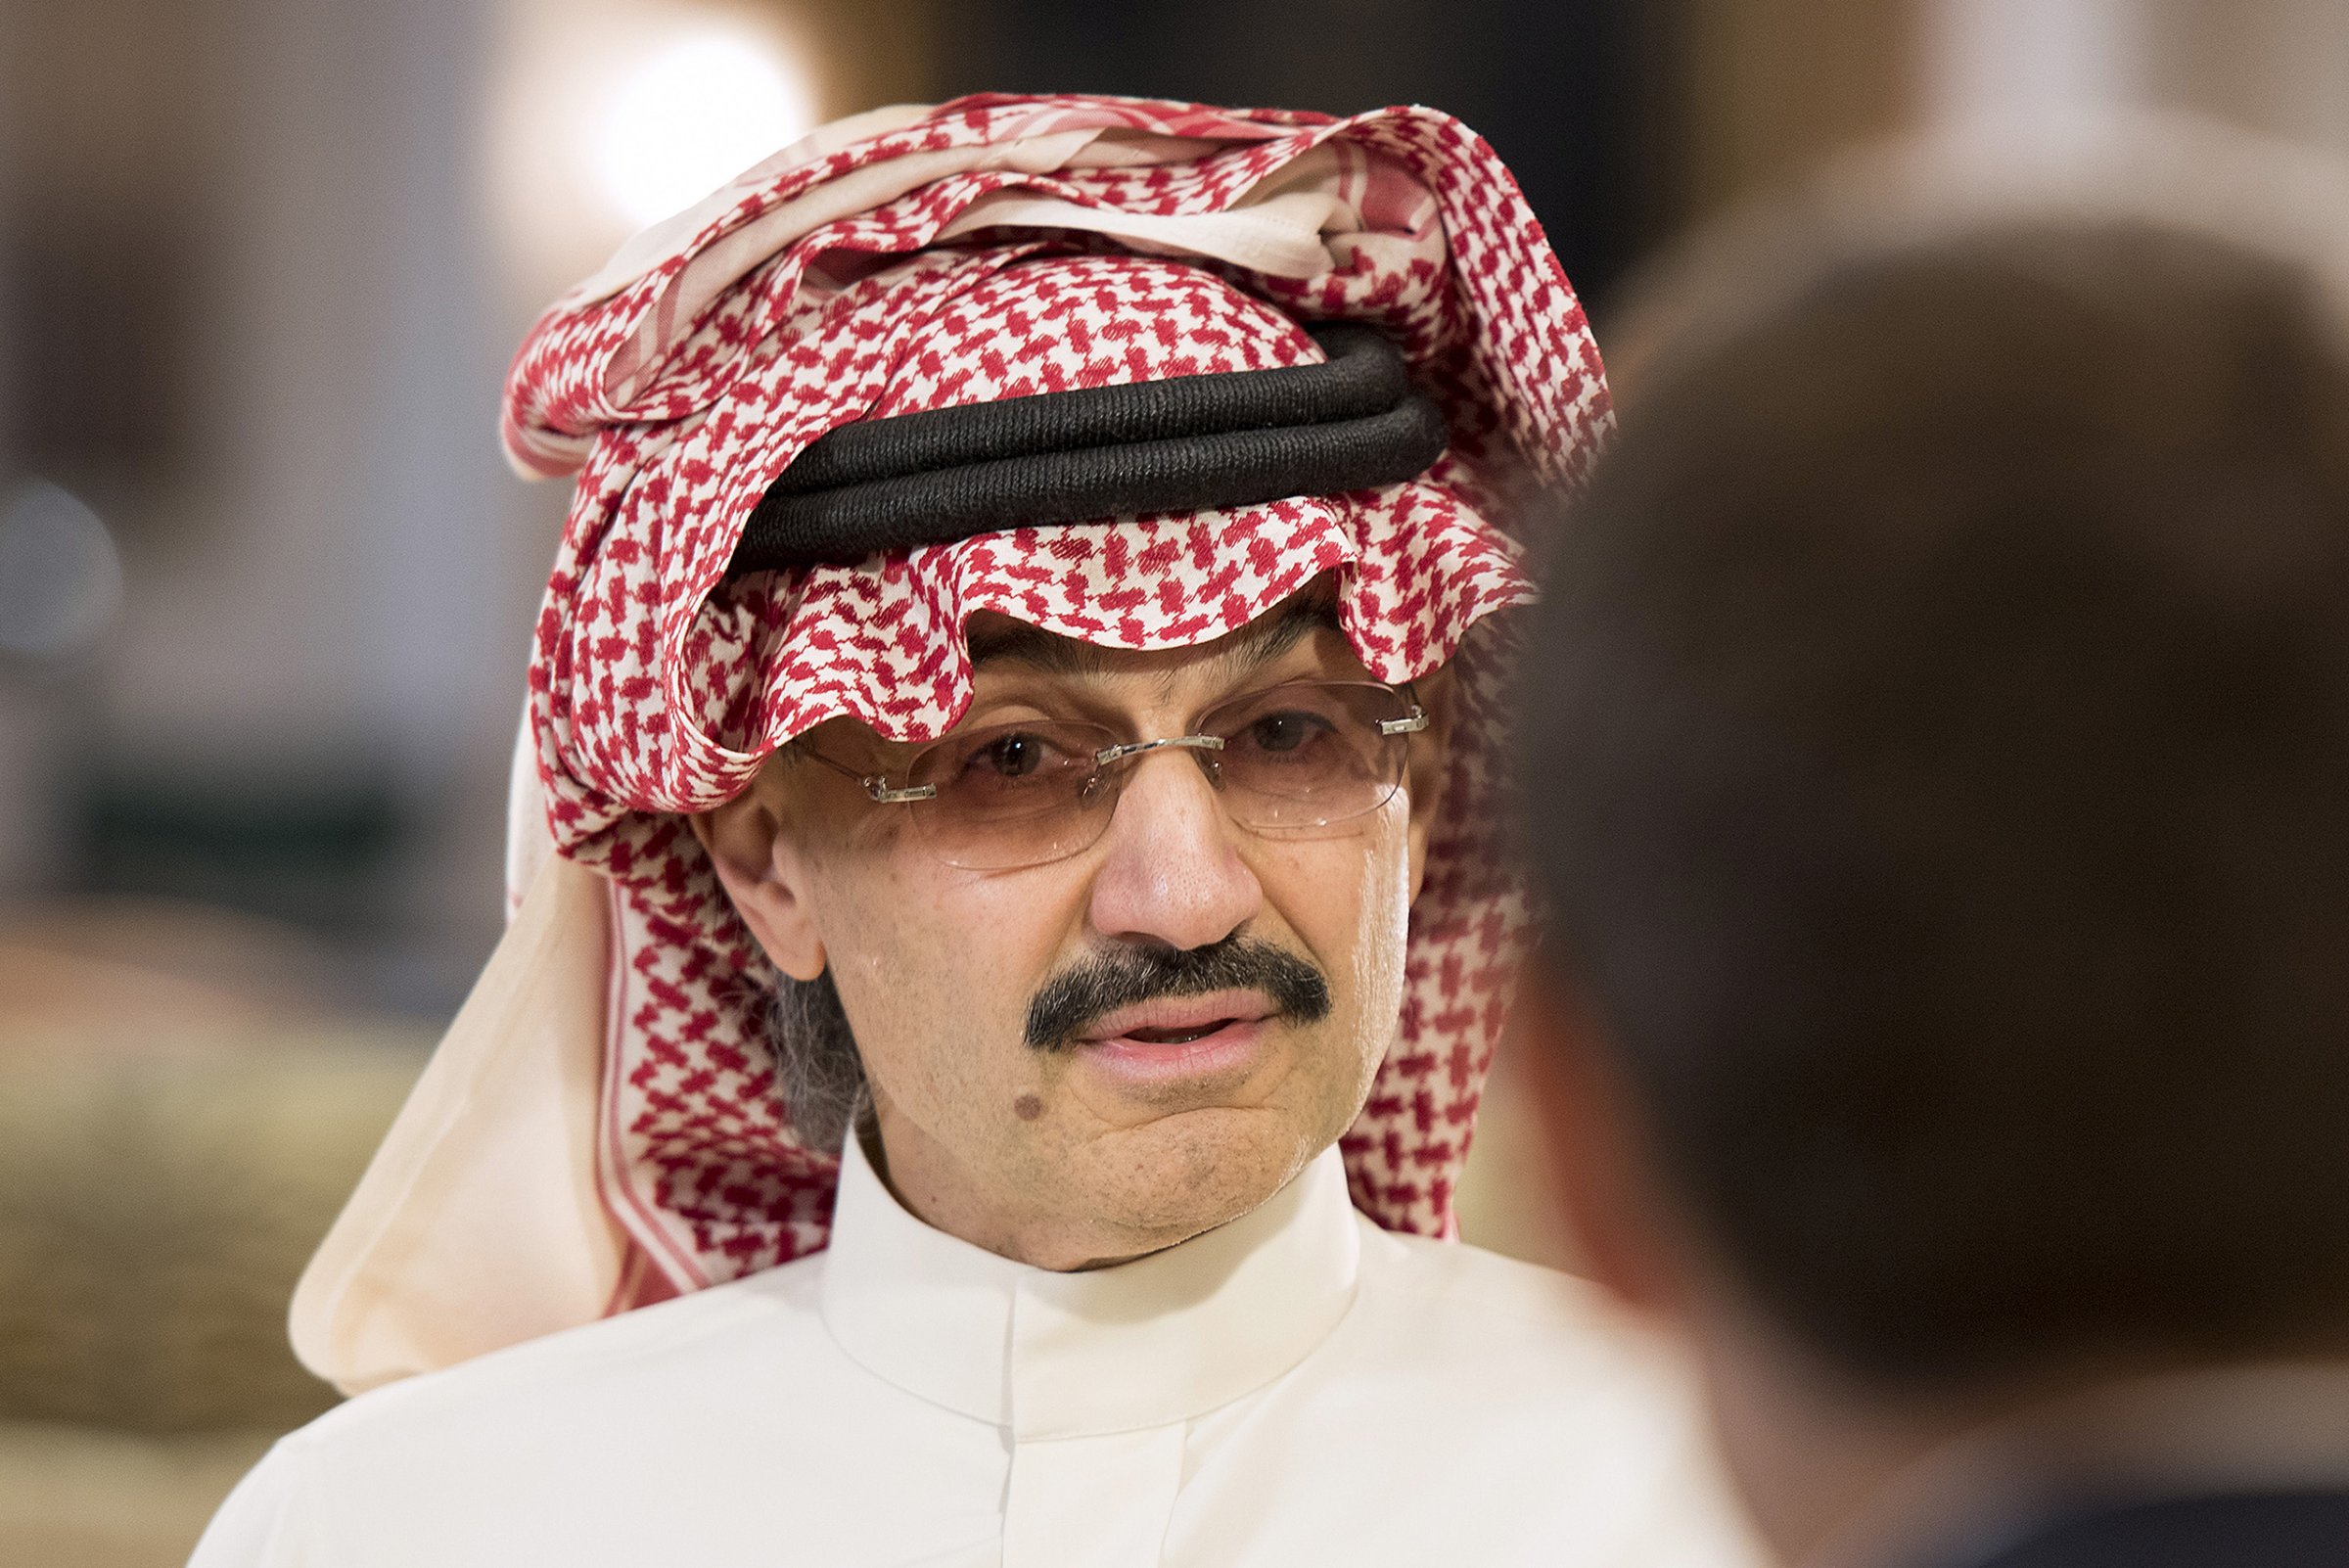 Prince Alwaleed Bin Talal. Saudi billionaire and founder of Kingdom Holding Co., speaks during a Bloomberg Television interview at the MiSK Global Forum event in Riyadh, Saudi Arabia, on Nov. 16, 2016.